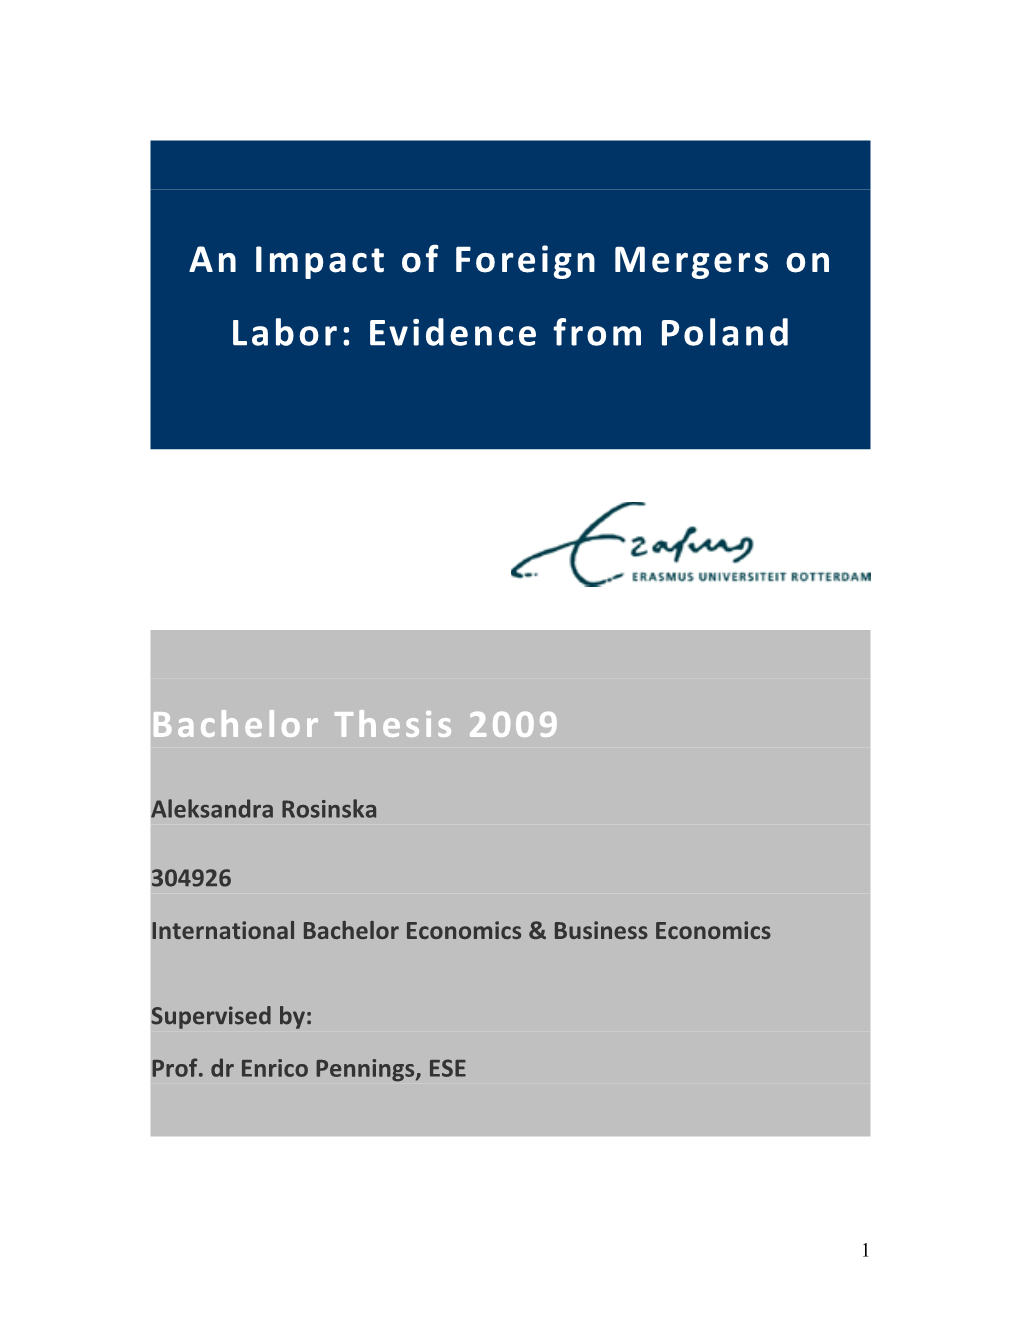 Impact of Foreign Mergers on Labor: Evidence from Poland